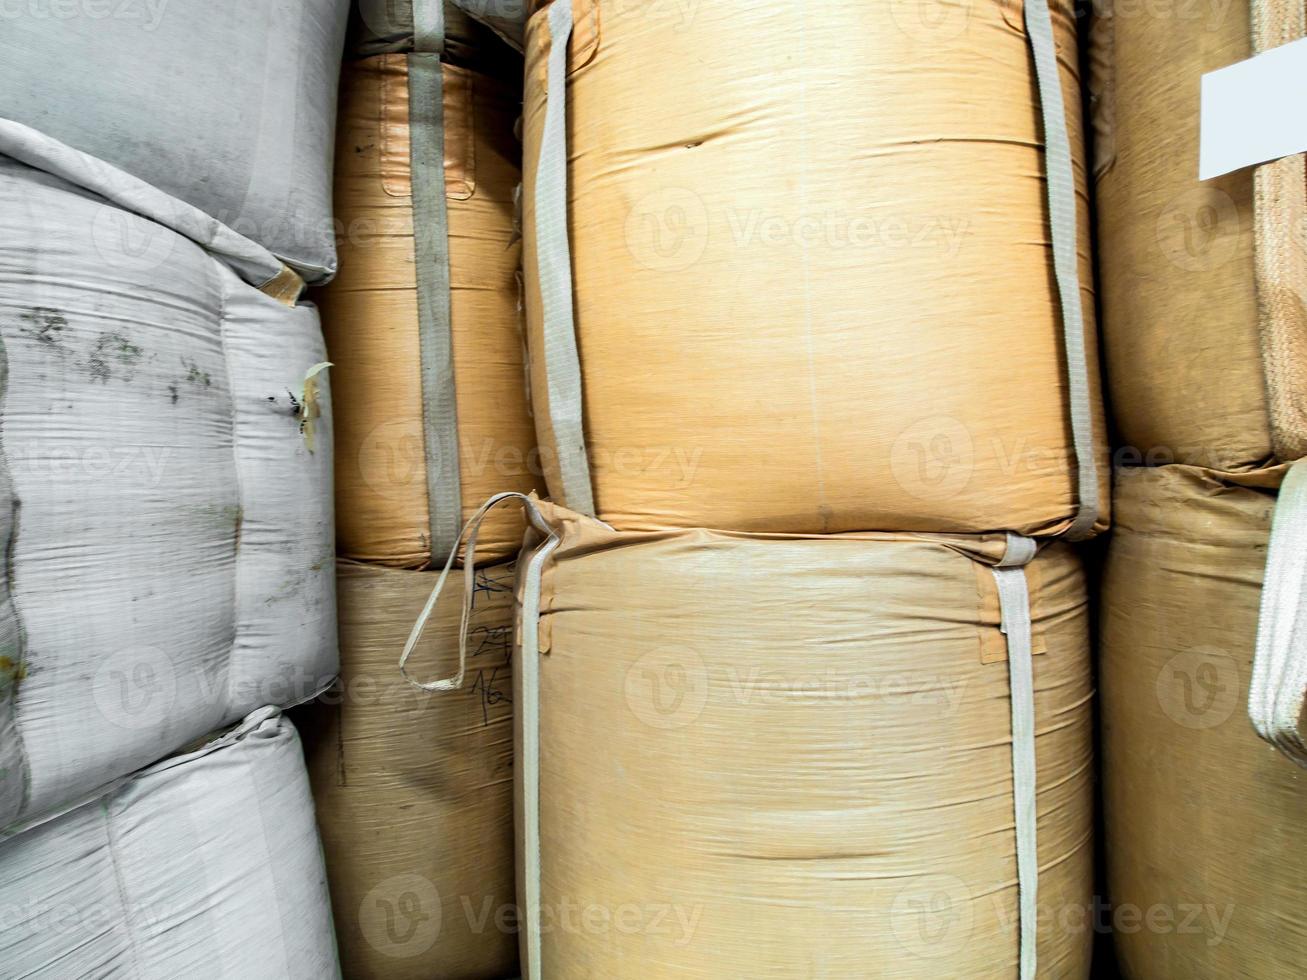 Raw material in the big woven plastic bag photo